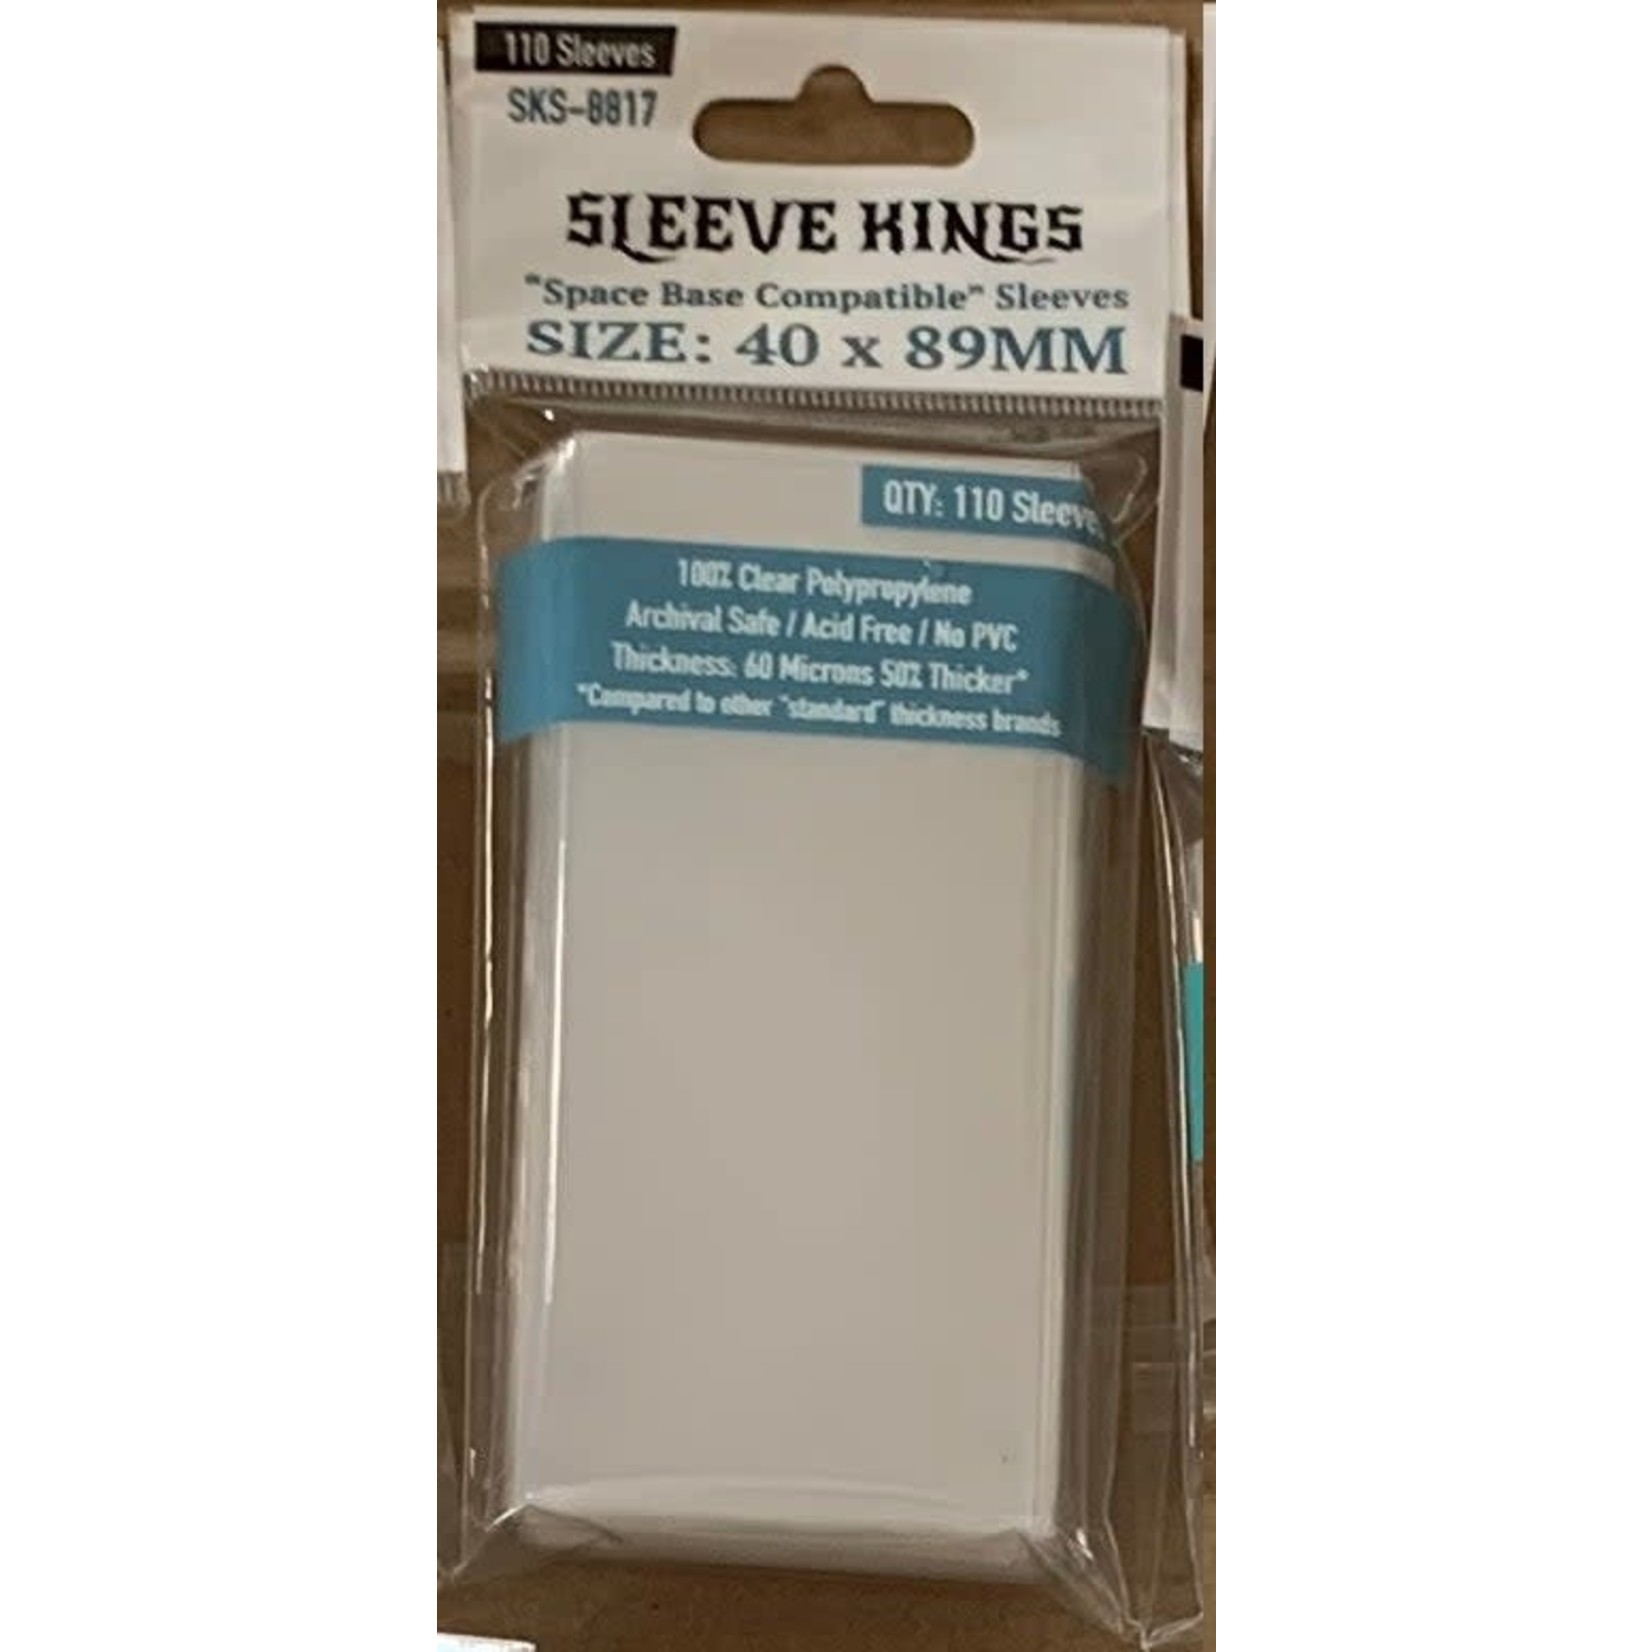 Sleeve Kings Card Sleeves: "Space Base" Compatible (40x89mm, 110 Count)